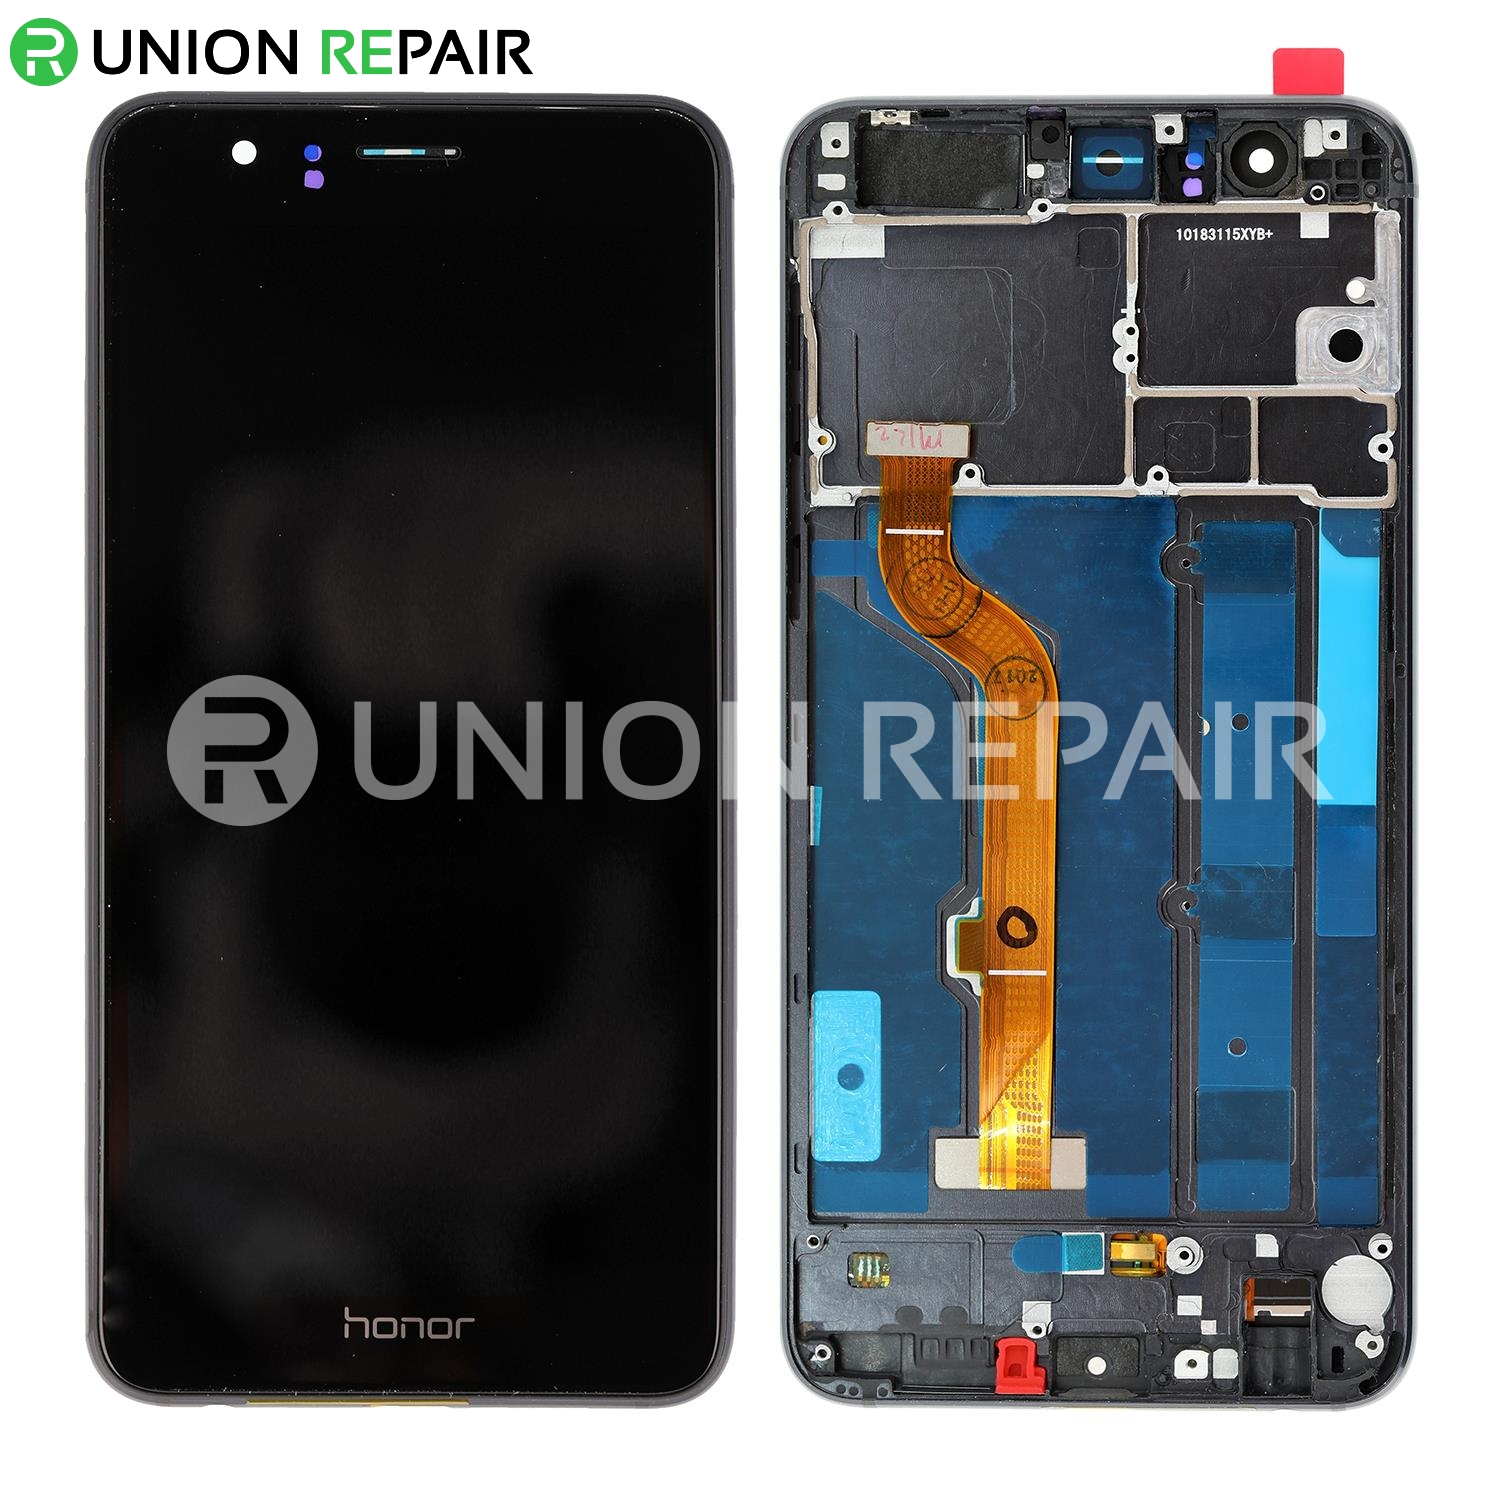 Replacement for Huawei Honor 8 LCD Screen Digitizer with Frame - Black